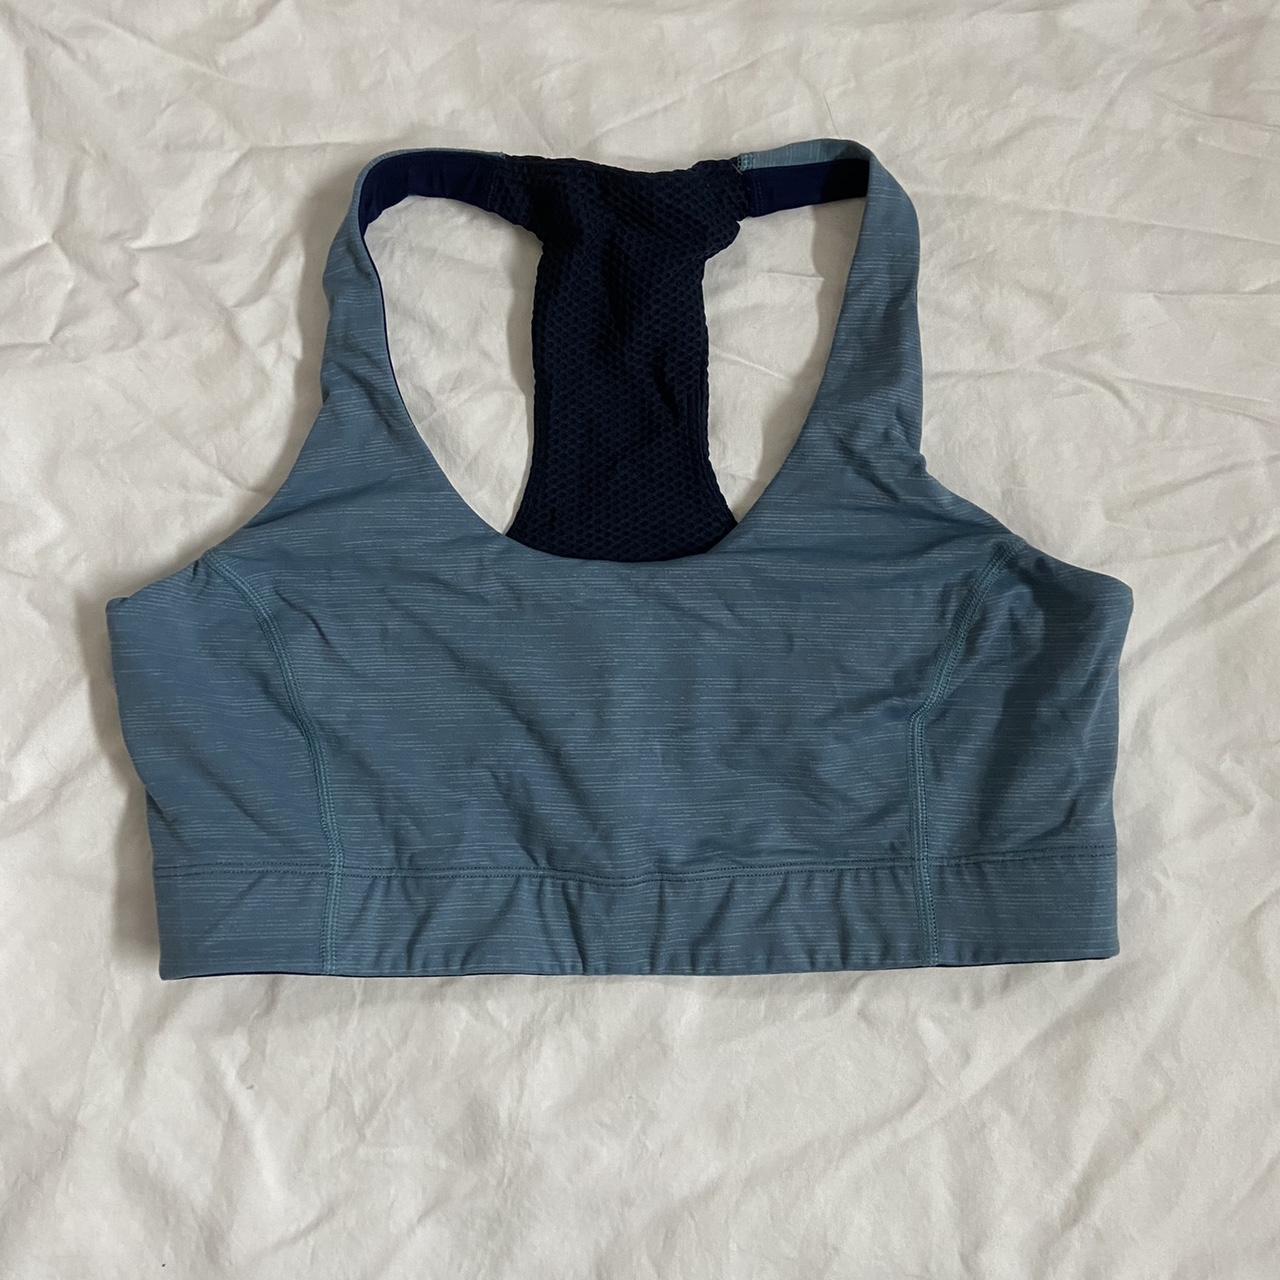 Outdoor Voices Sports Bra — highly supportive, great - Depop